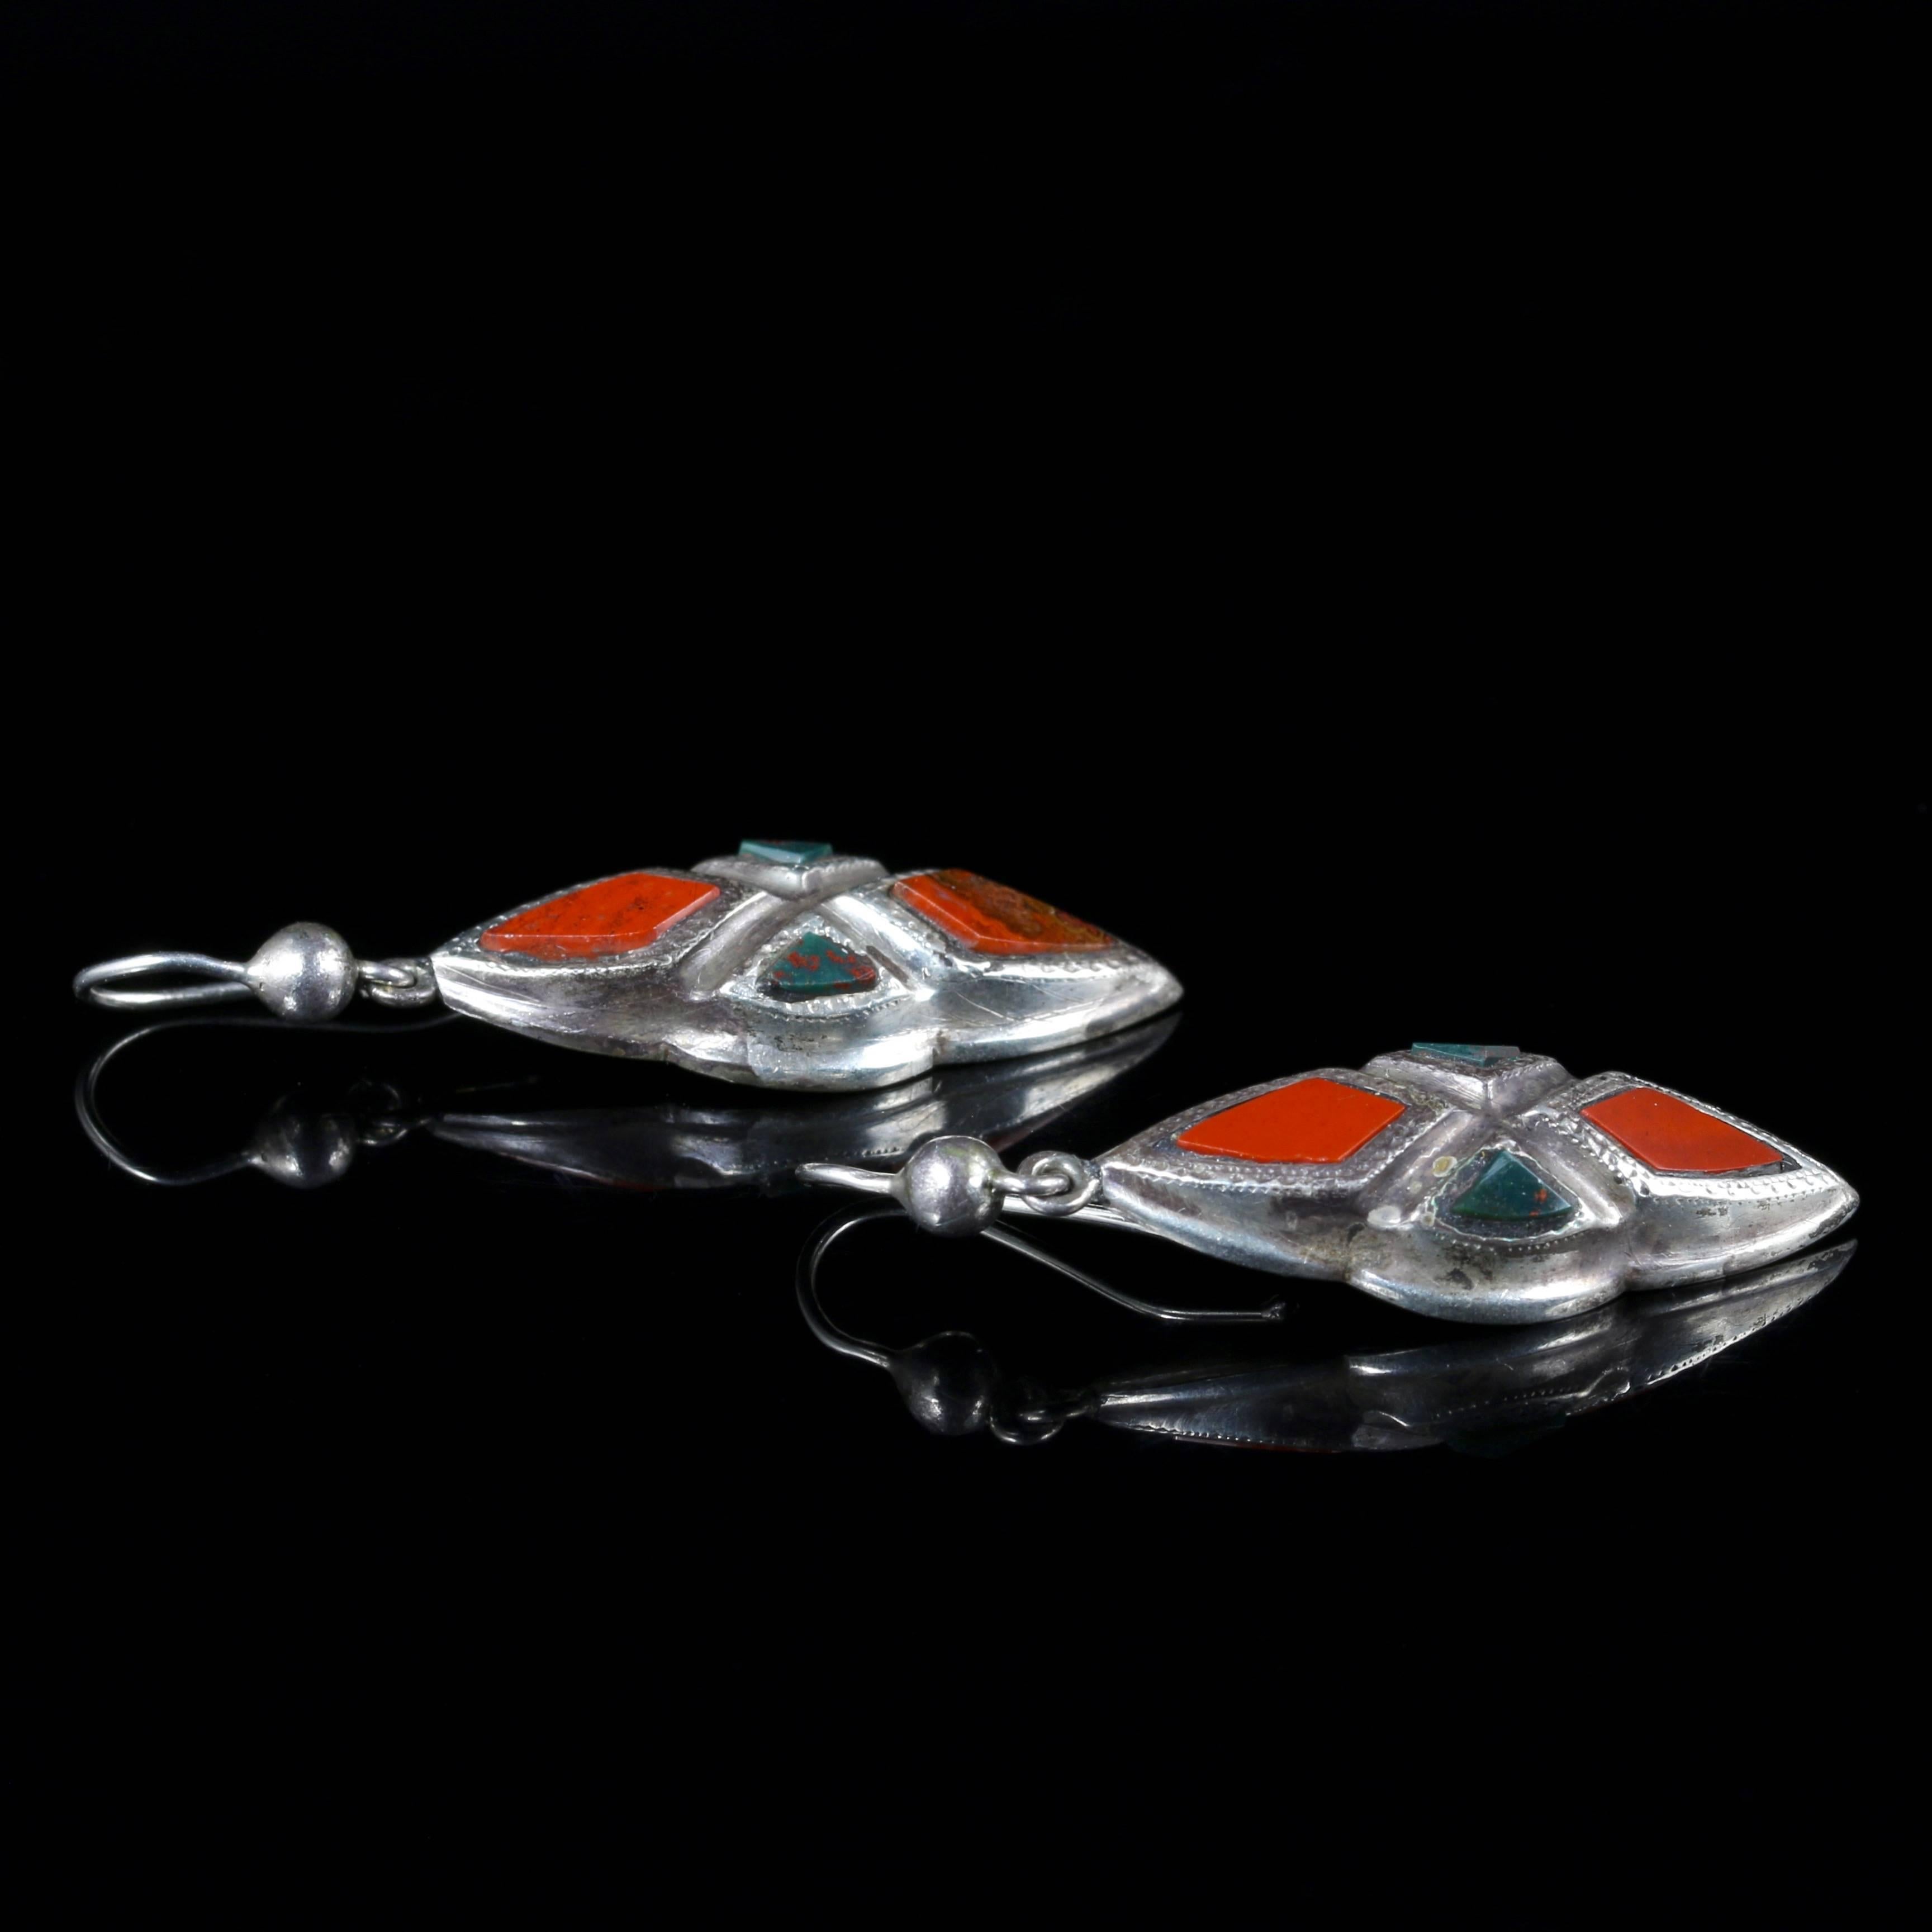 These fabulous Victorian Scottish Silver earrings are set with beautiful Agate stones. 

Circa 1860.

Lots of lovely natural Agates are set into these pristine Victorian Silver Scottish earrings, with natural graining of the stone showing through.